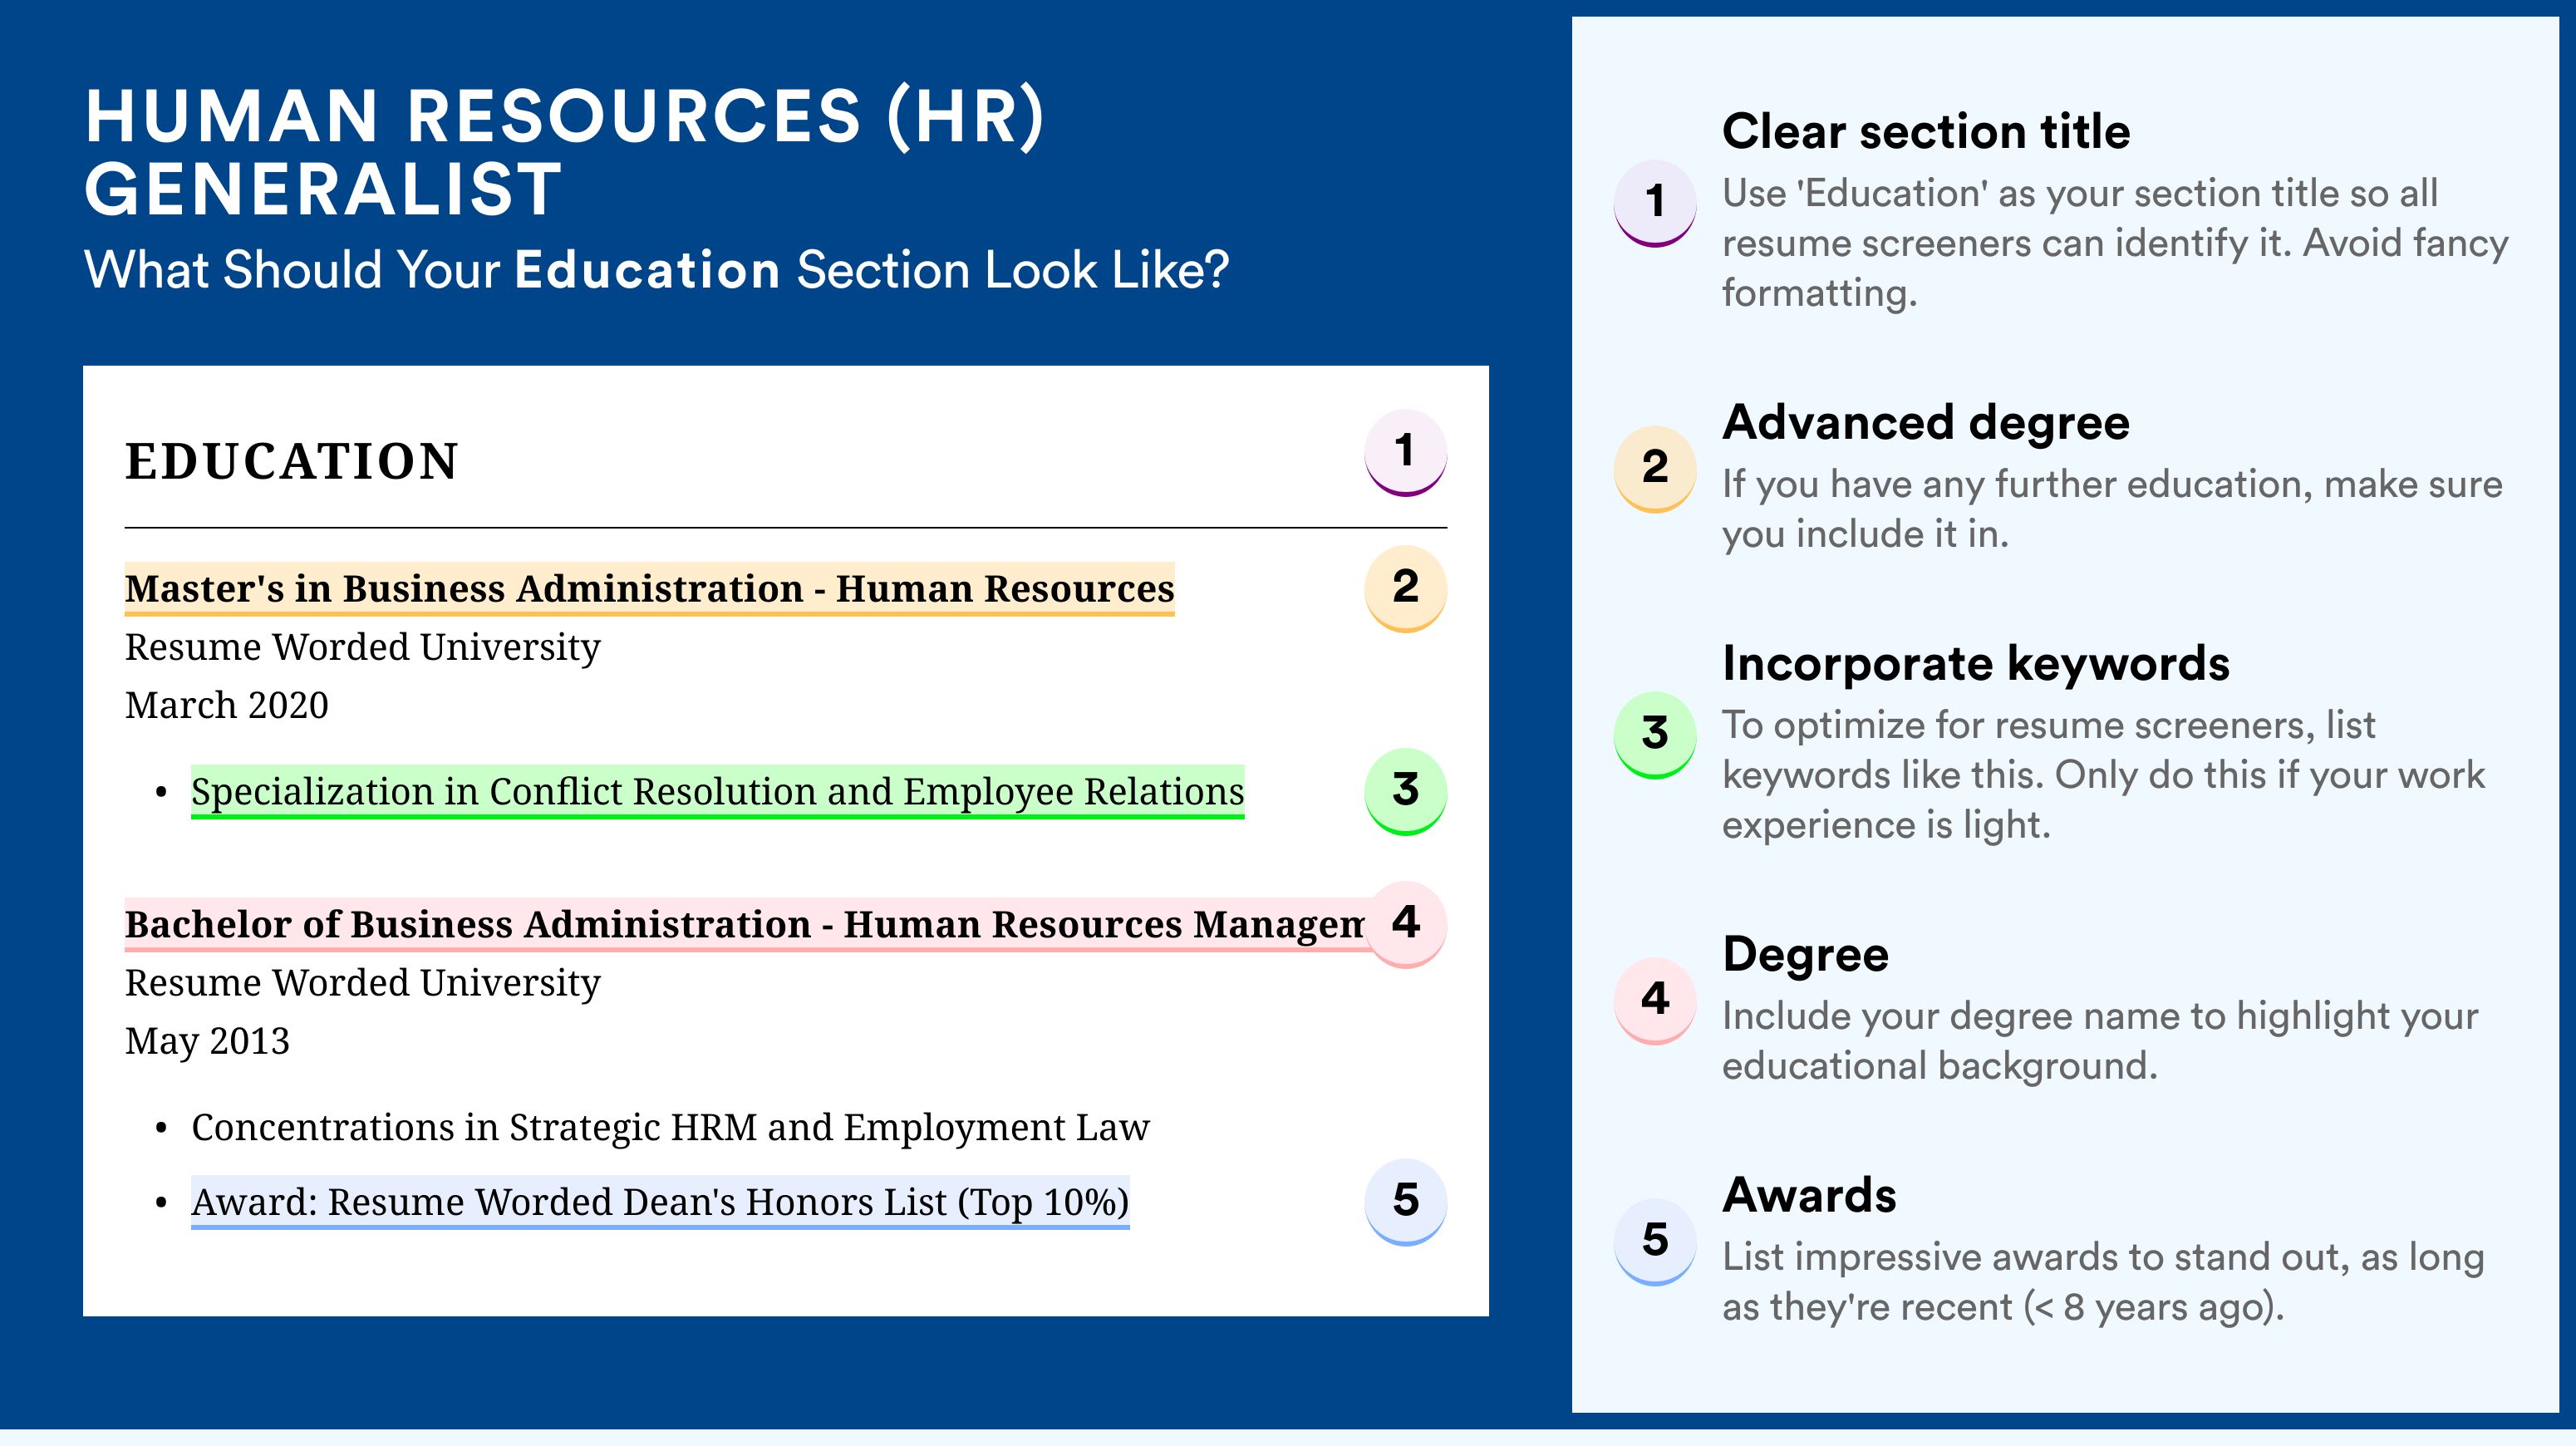 How To Write An Education Section - Human Resources (HR) Generalist Roles